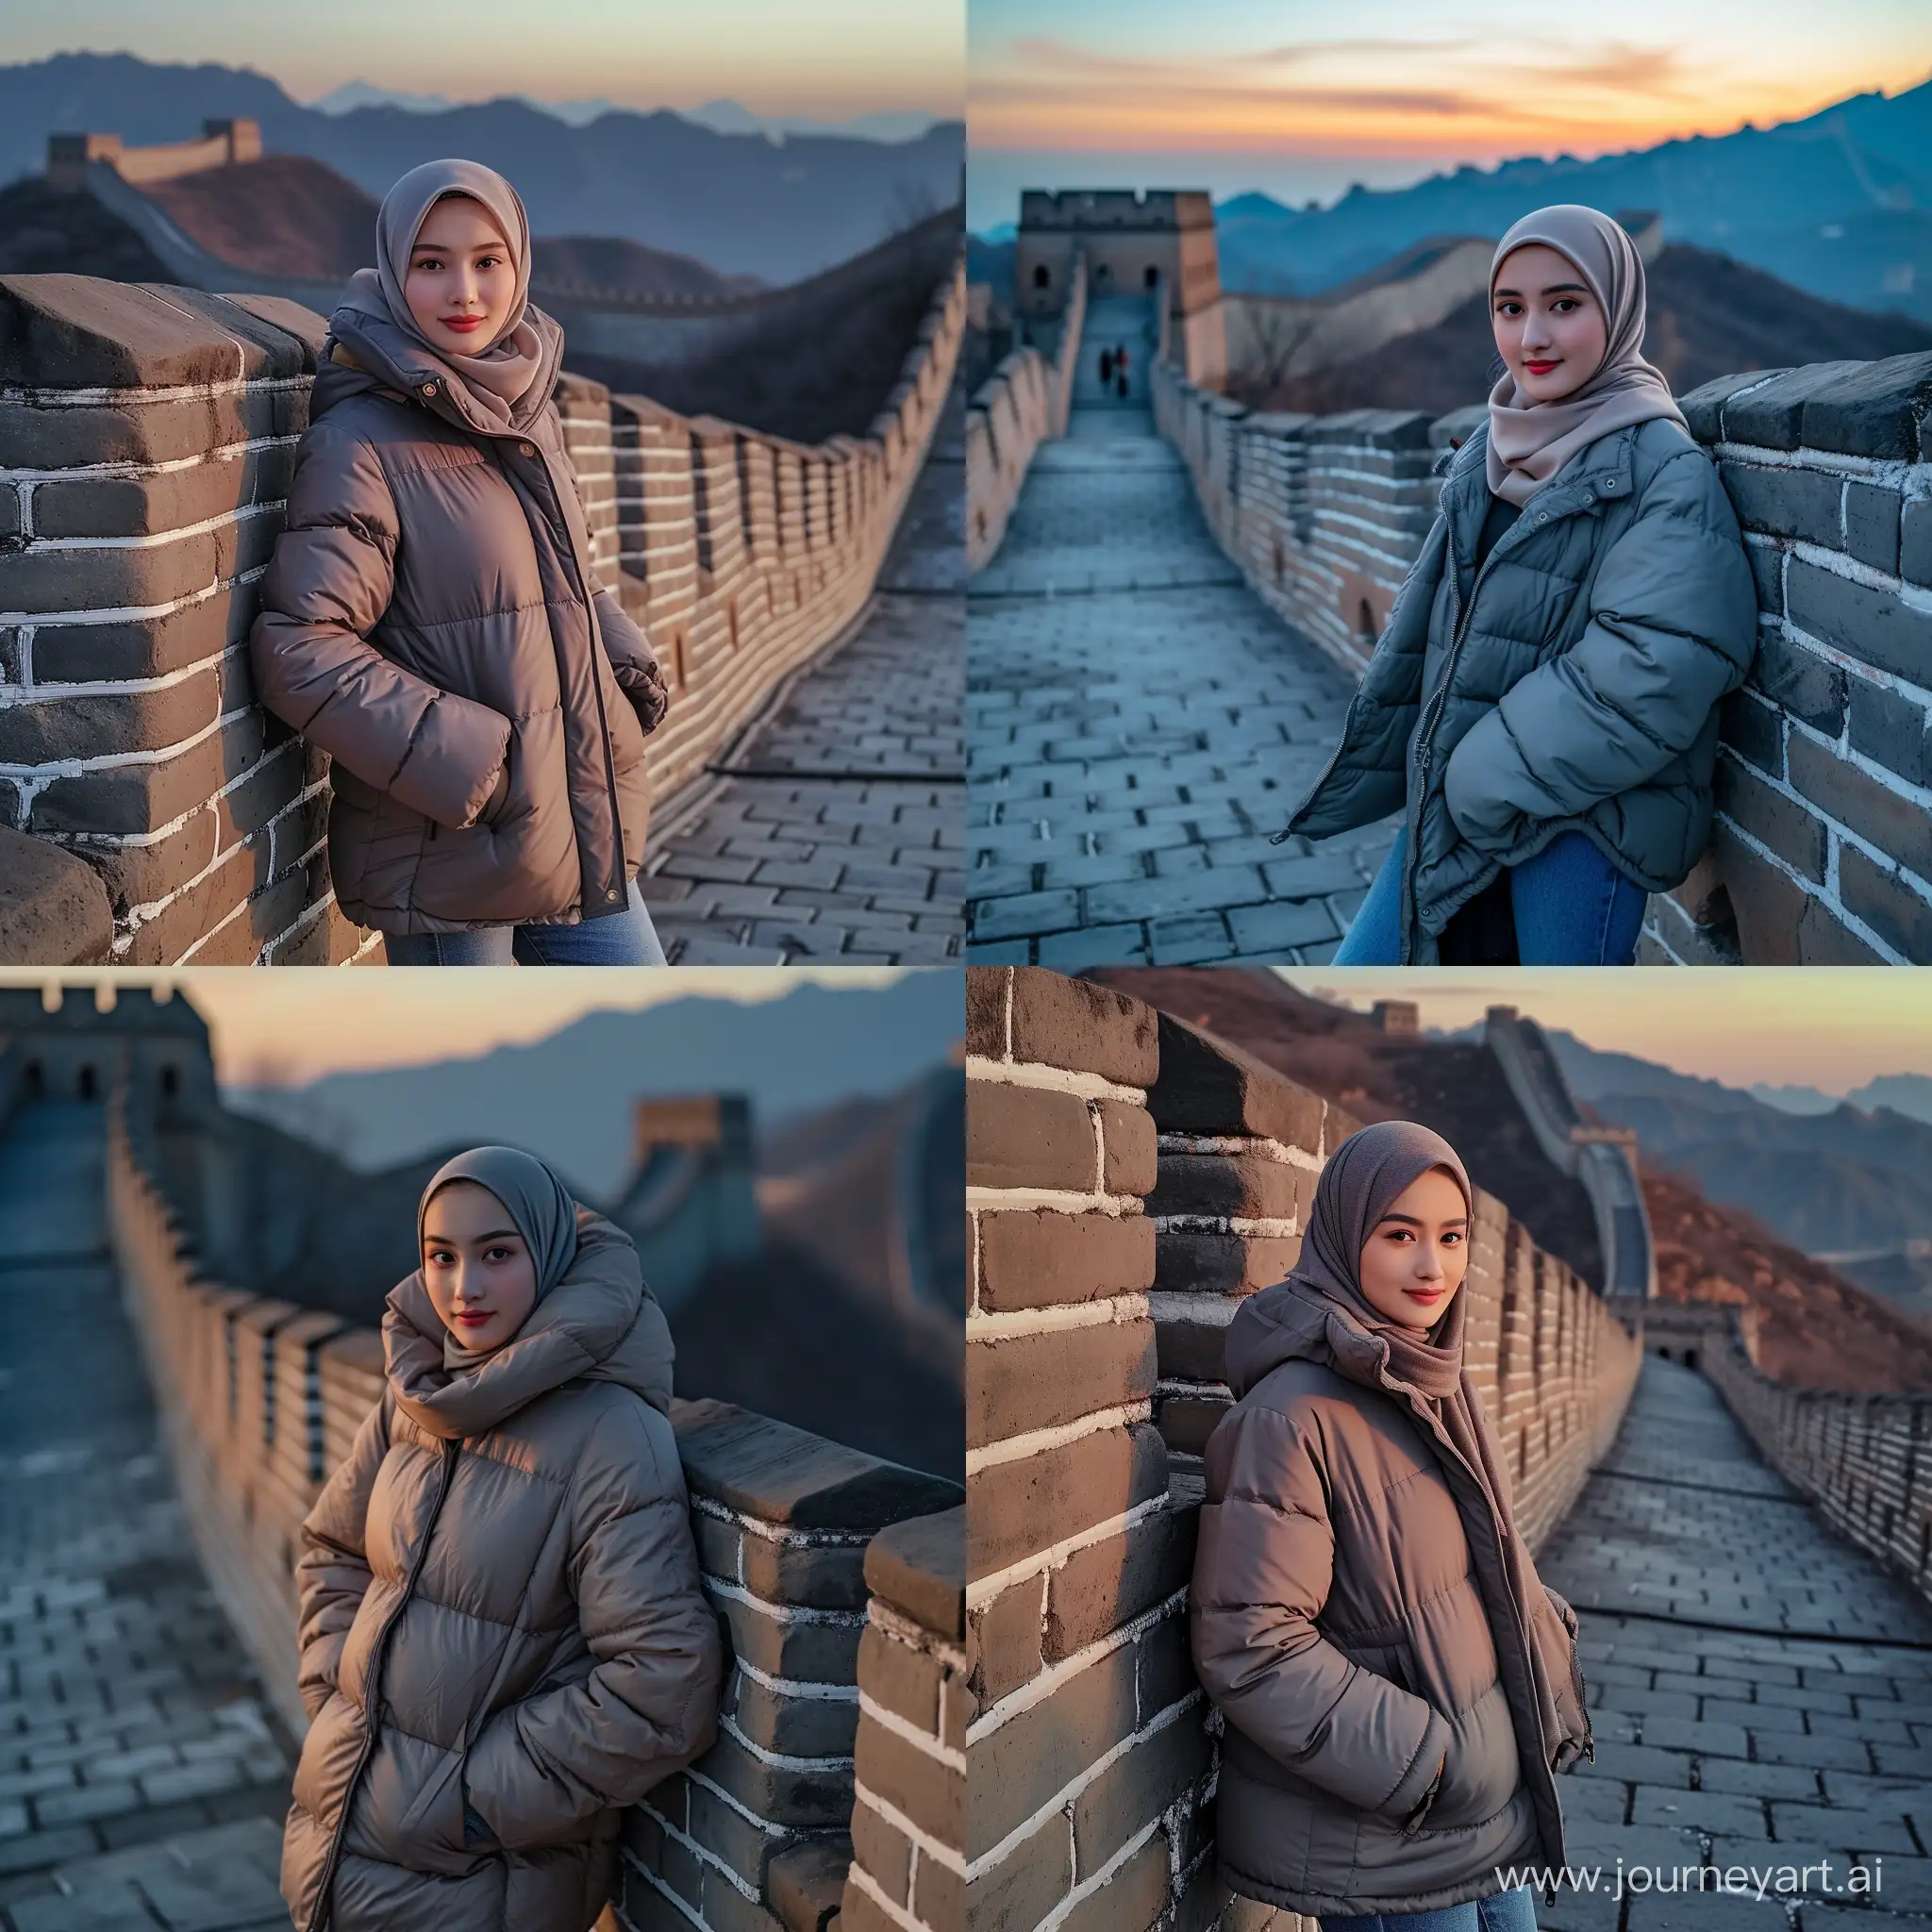 Javanese-Woman-Strikes-a-Model-Pose-on-the-Great-Wall-at-Night